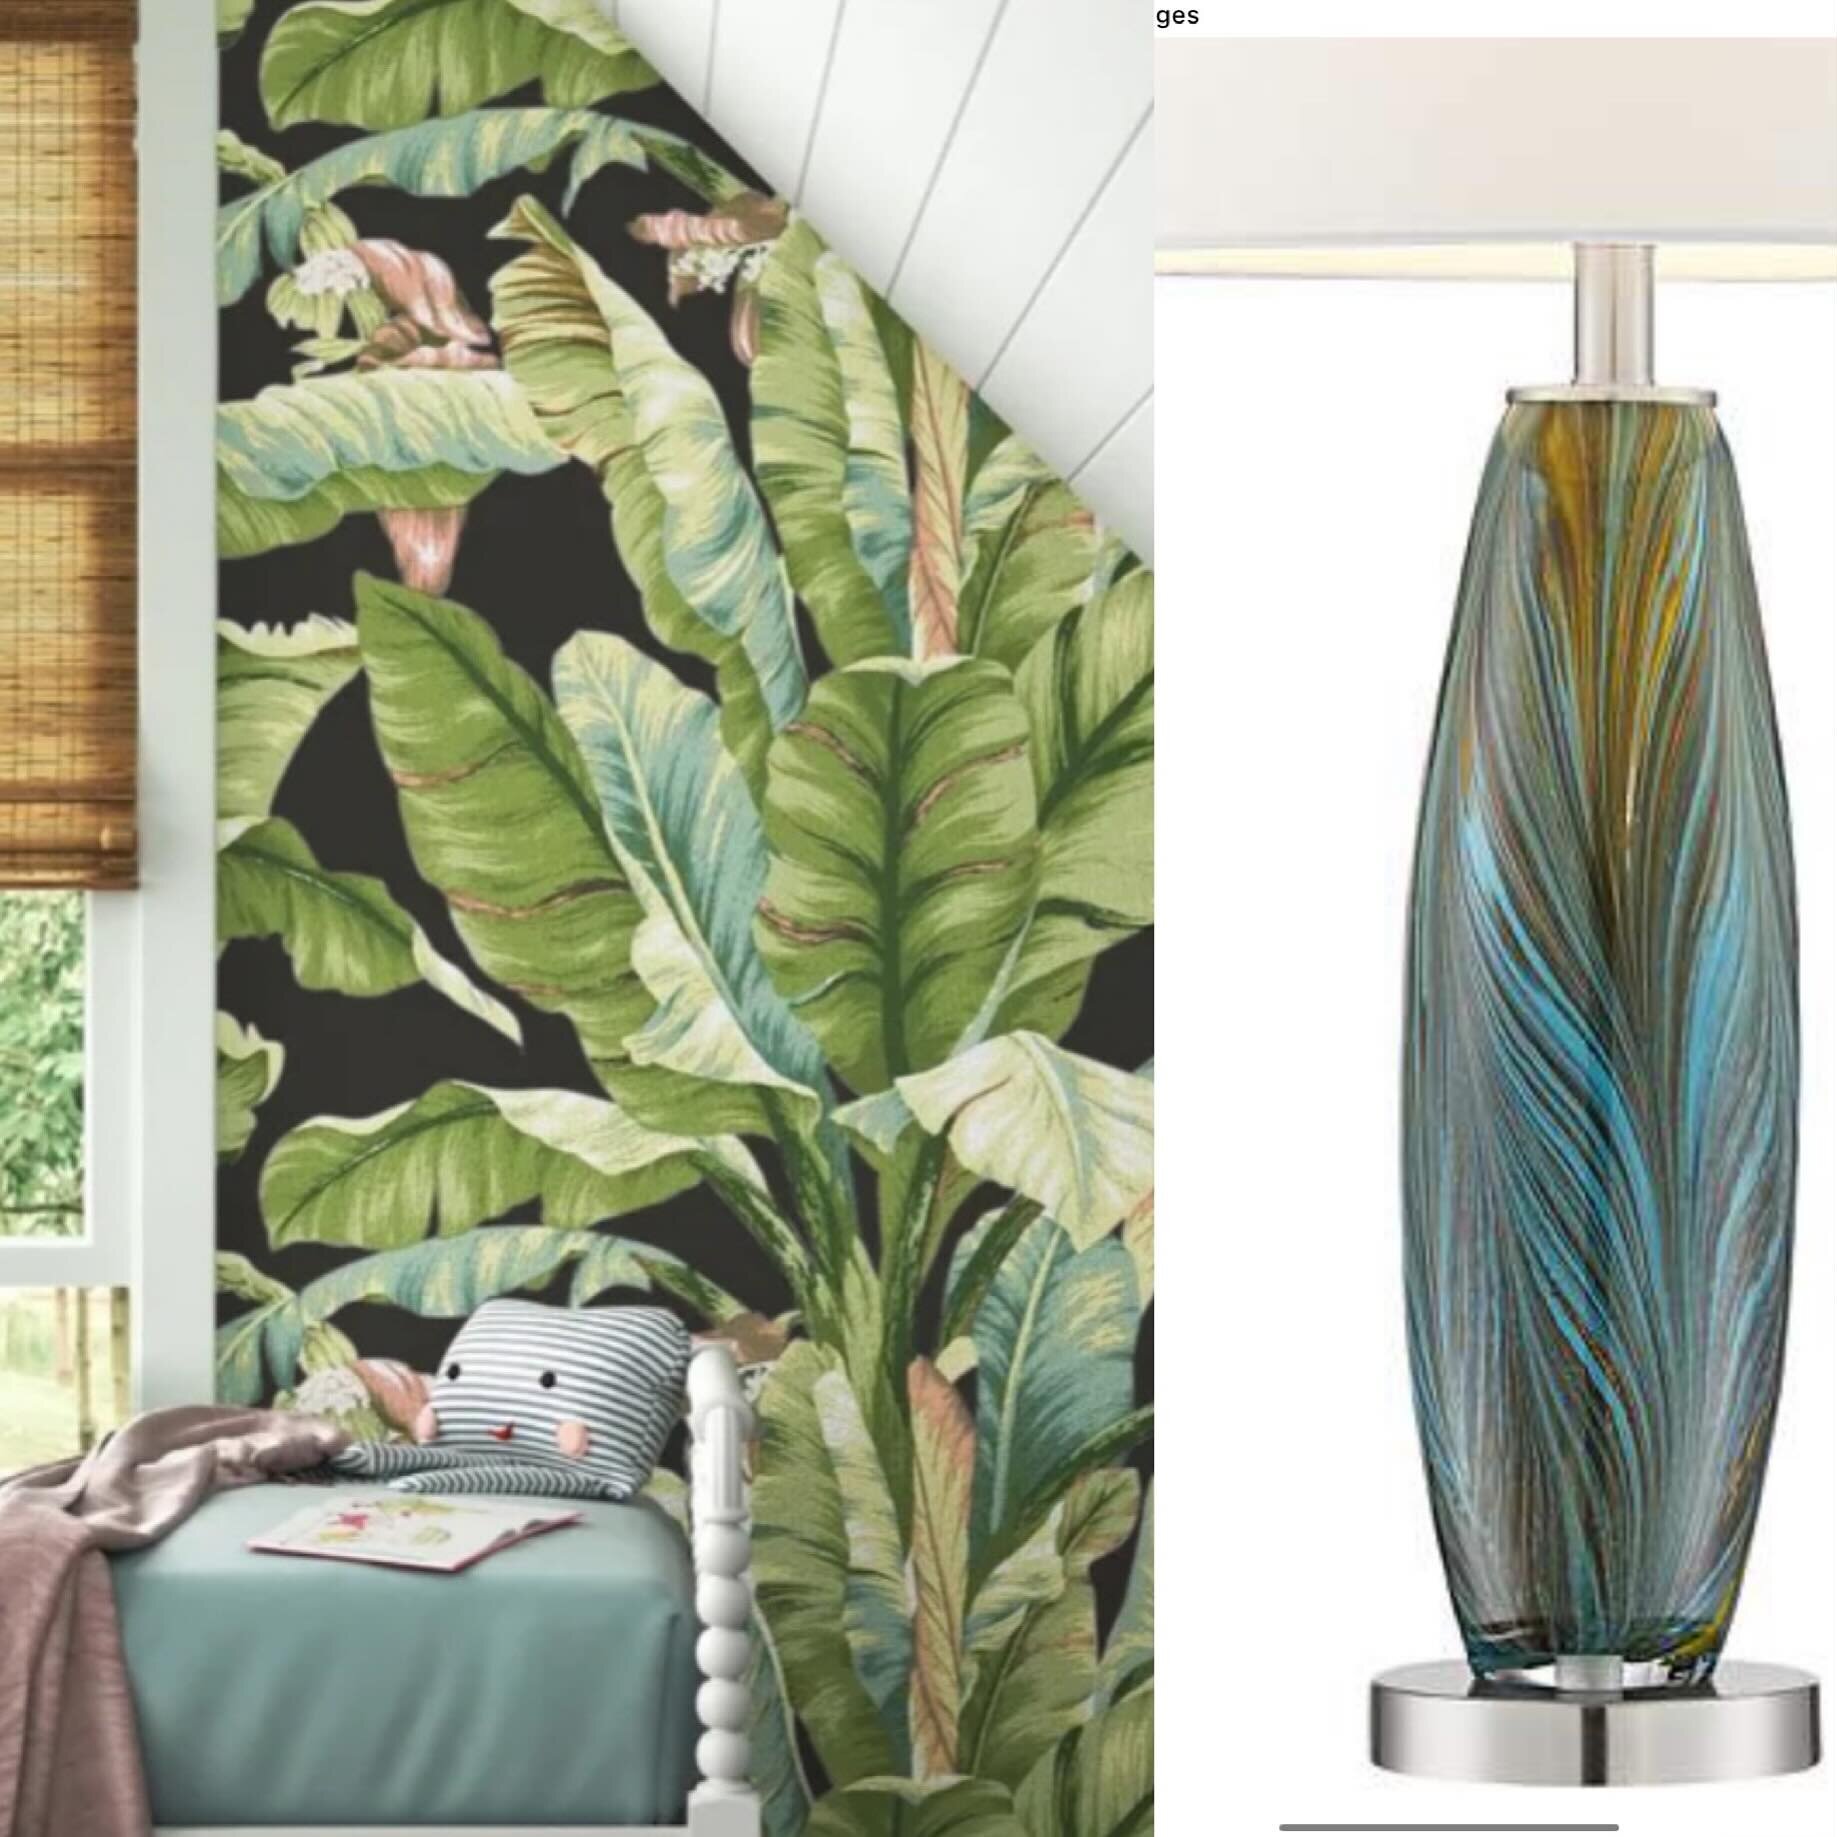 Working with a client virtually and she asked me to choose a lamp to go with her wallpaper. I think we found the one! #wallpaper #lamplove #ruthiestaalseninteriors #homedecor #palmleafwallpaper #virtualinteriordesign